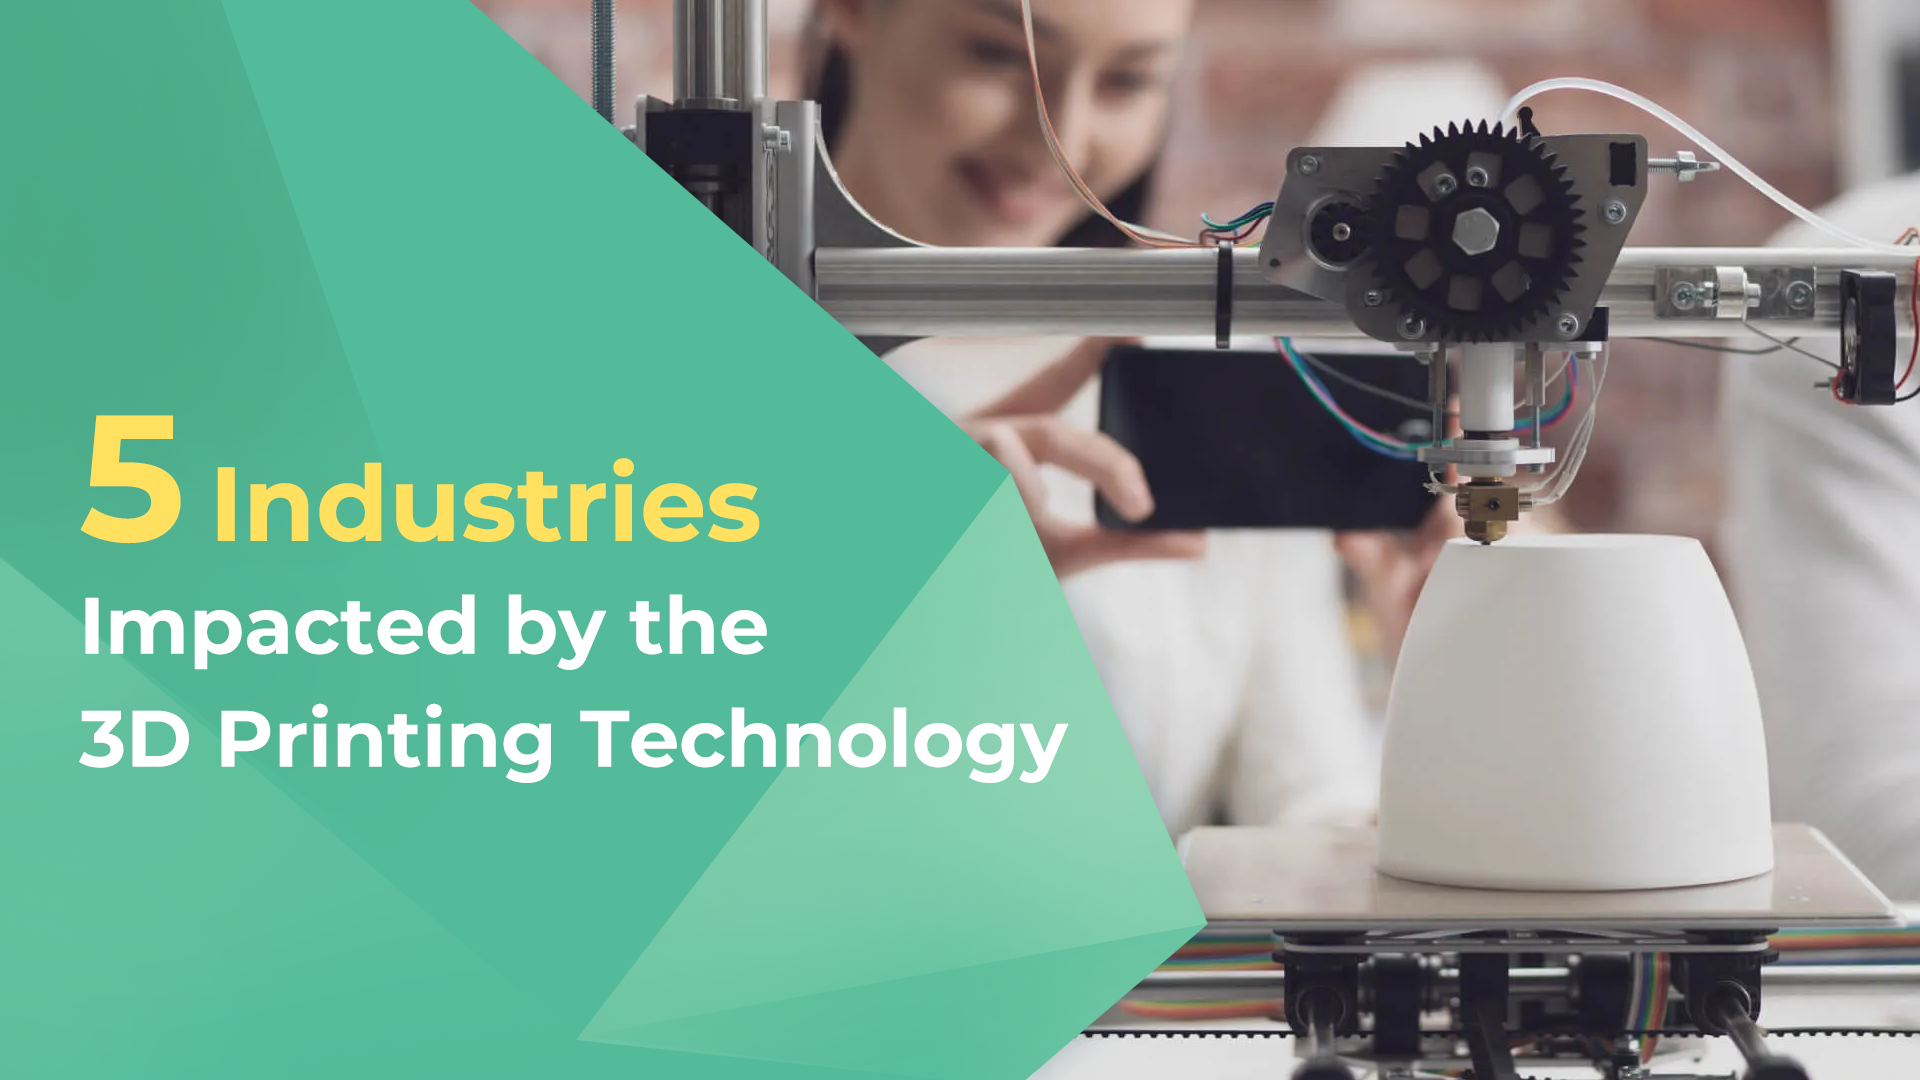 5 Industries Impacted by the 3D Printing Technology